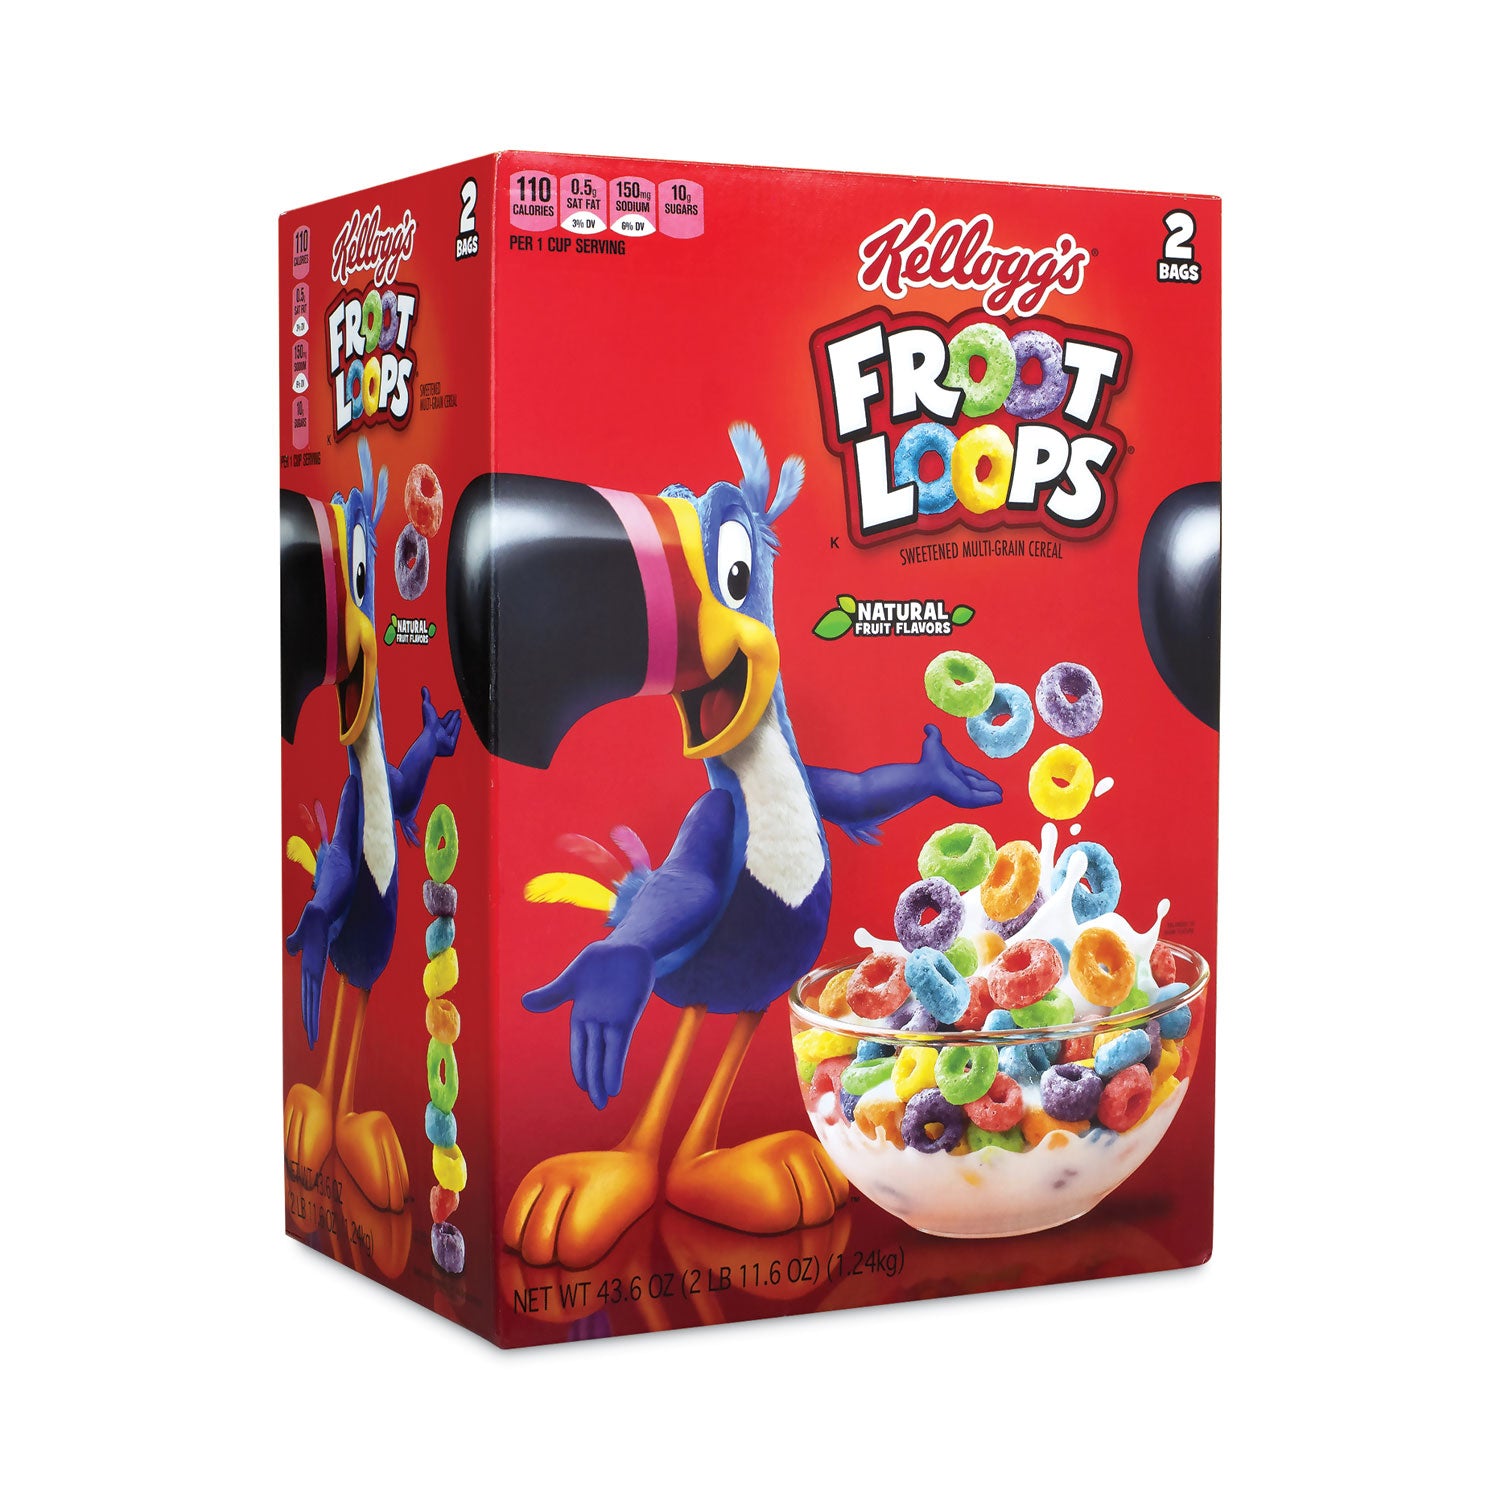 froot-loops-breakfast-cereal-43-oz-bag-2-bags-box-ships-in-1-3-business-days_grr22000900 - 1